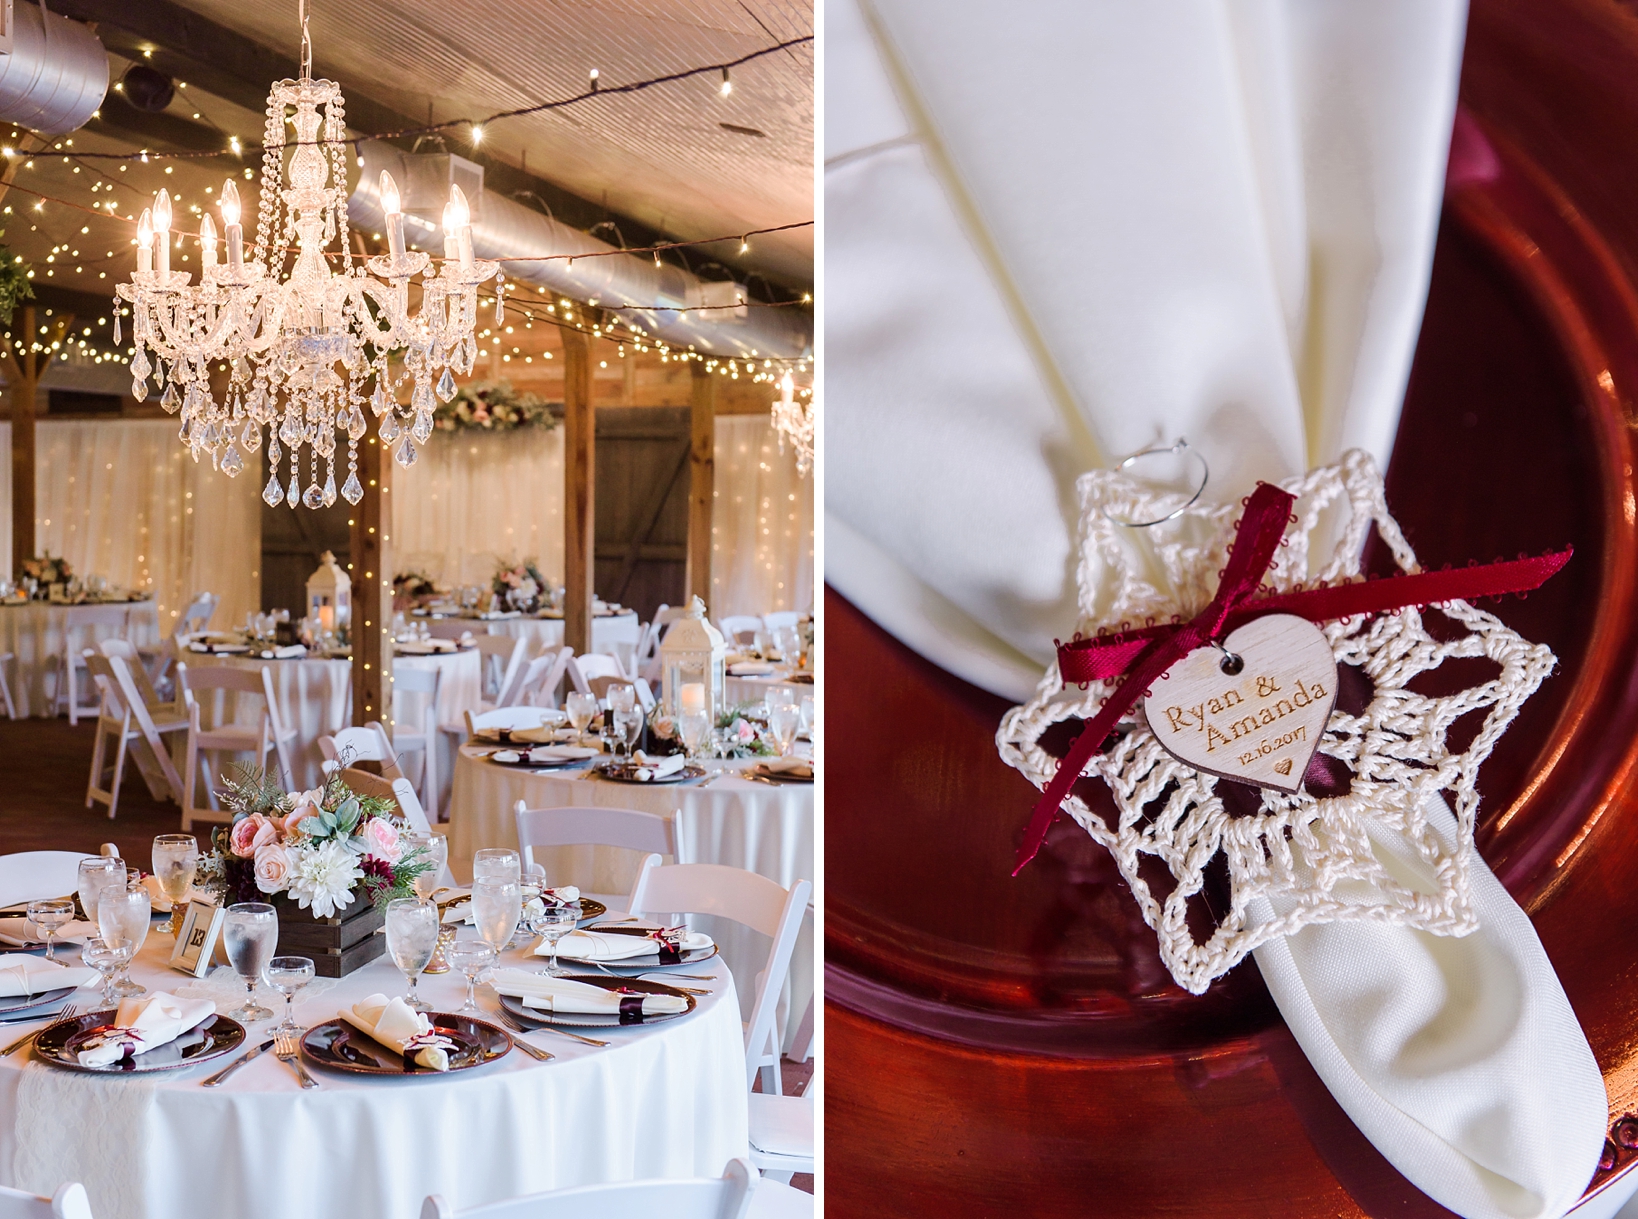 Rustic wedding reception decor featuring chandeliers and hand knit snowflake ornaments